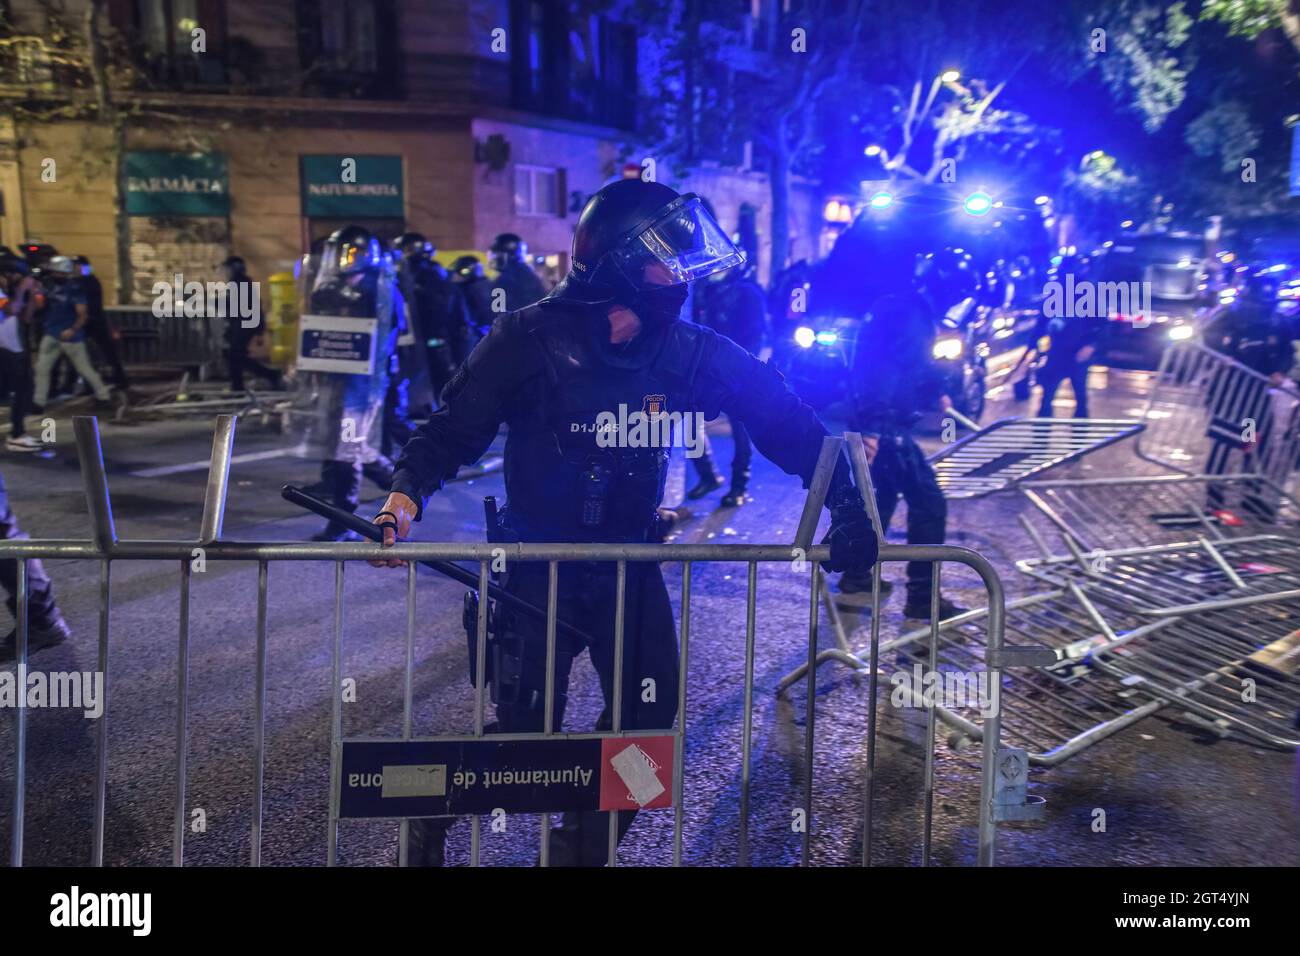 Barcelona, Spain. 01st Oct, 2021. Policemen seen removing barricades placed by protesters, during the demonstration. The activist group, CDR (Committees for the Defense of the Republic) has called a demonstration against the Spanish state and for the independence of Catalonia on October 1 the fourth anniversary of the Catalan independence referendum of 2017 (Photo by Thiago Prudencio/SOPA Images/Sipa USA) Credit: Sipa USA/Alamy Live News Stock Photo